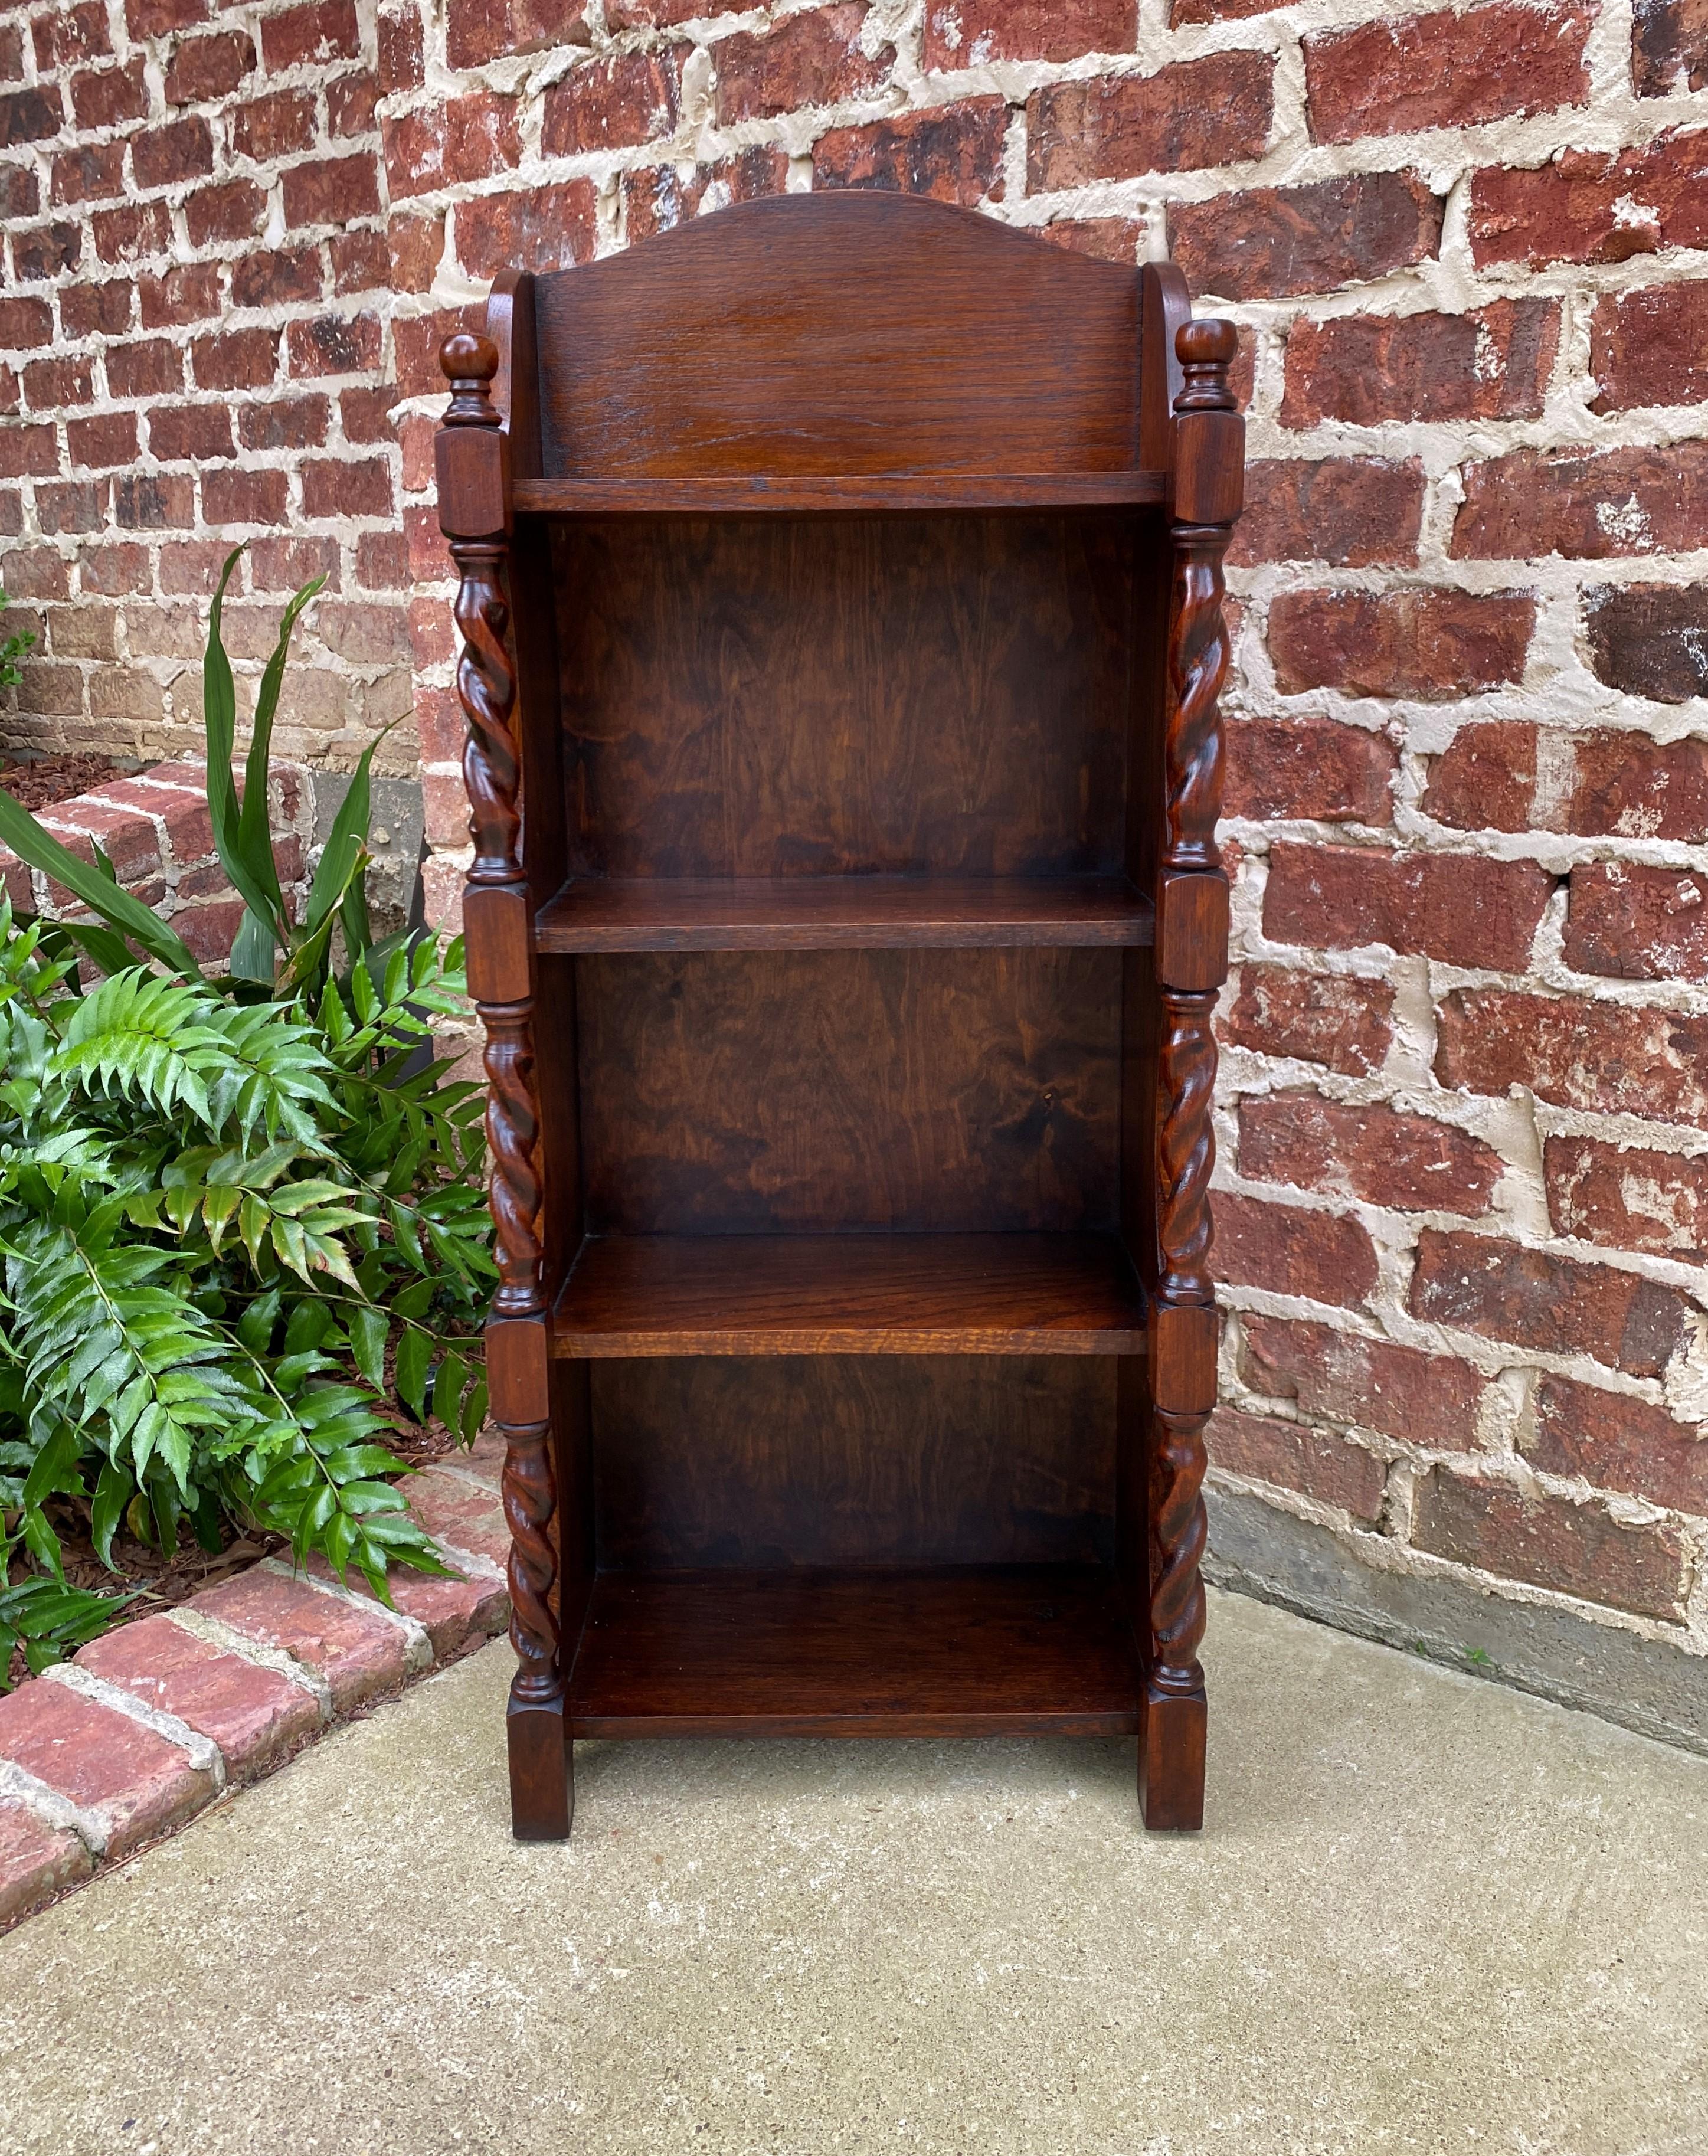 Charming antique Petite English oak barley twist freestanding open display/book shelf or bookcase ~~c. 1920s

Perfect for displaying your favorite antique collectibles or use as a small bookcase~~classic traditional English style!

Overall